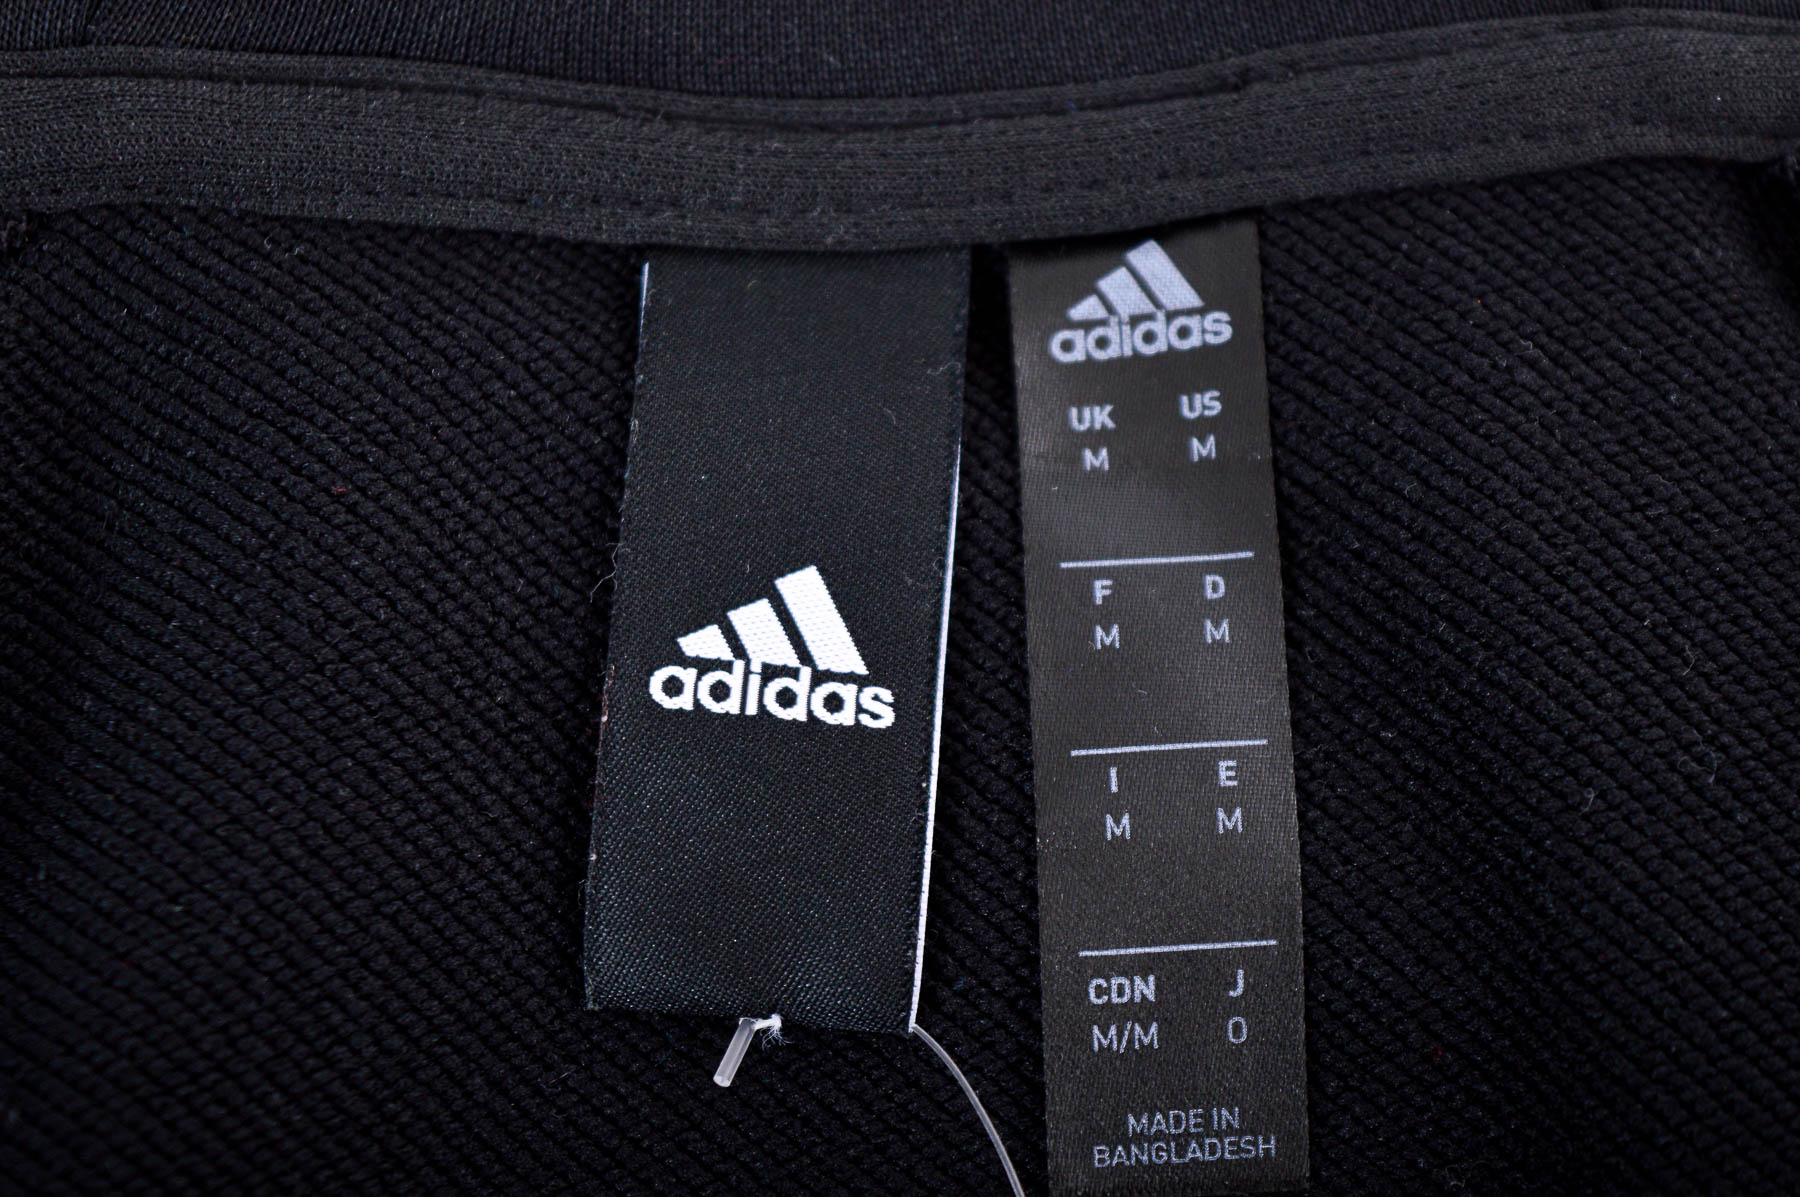 Male sports top - Adidas - 2